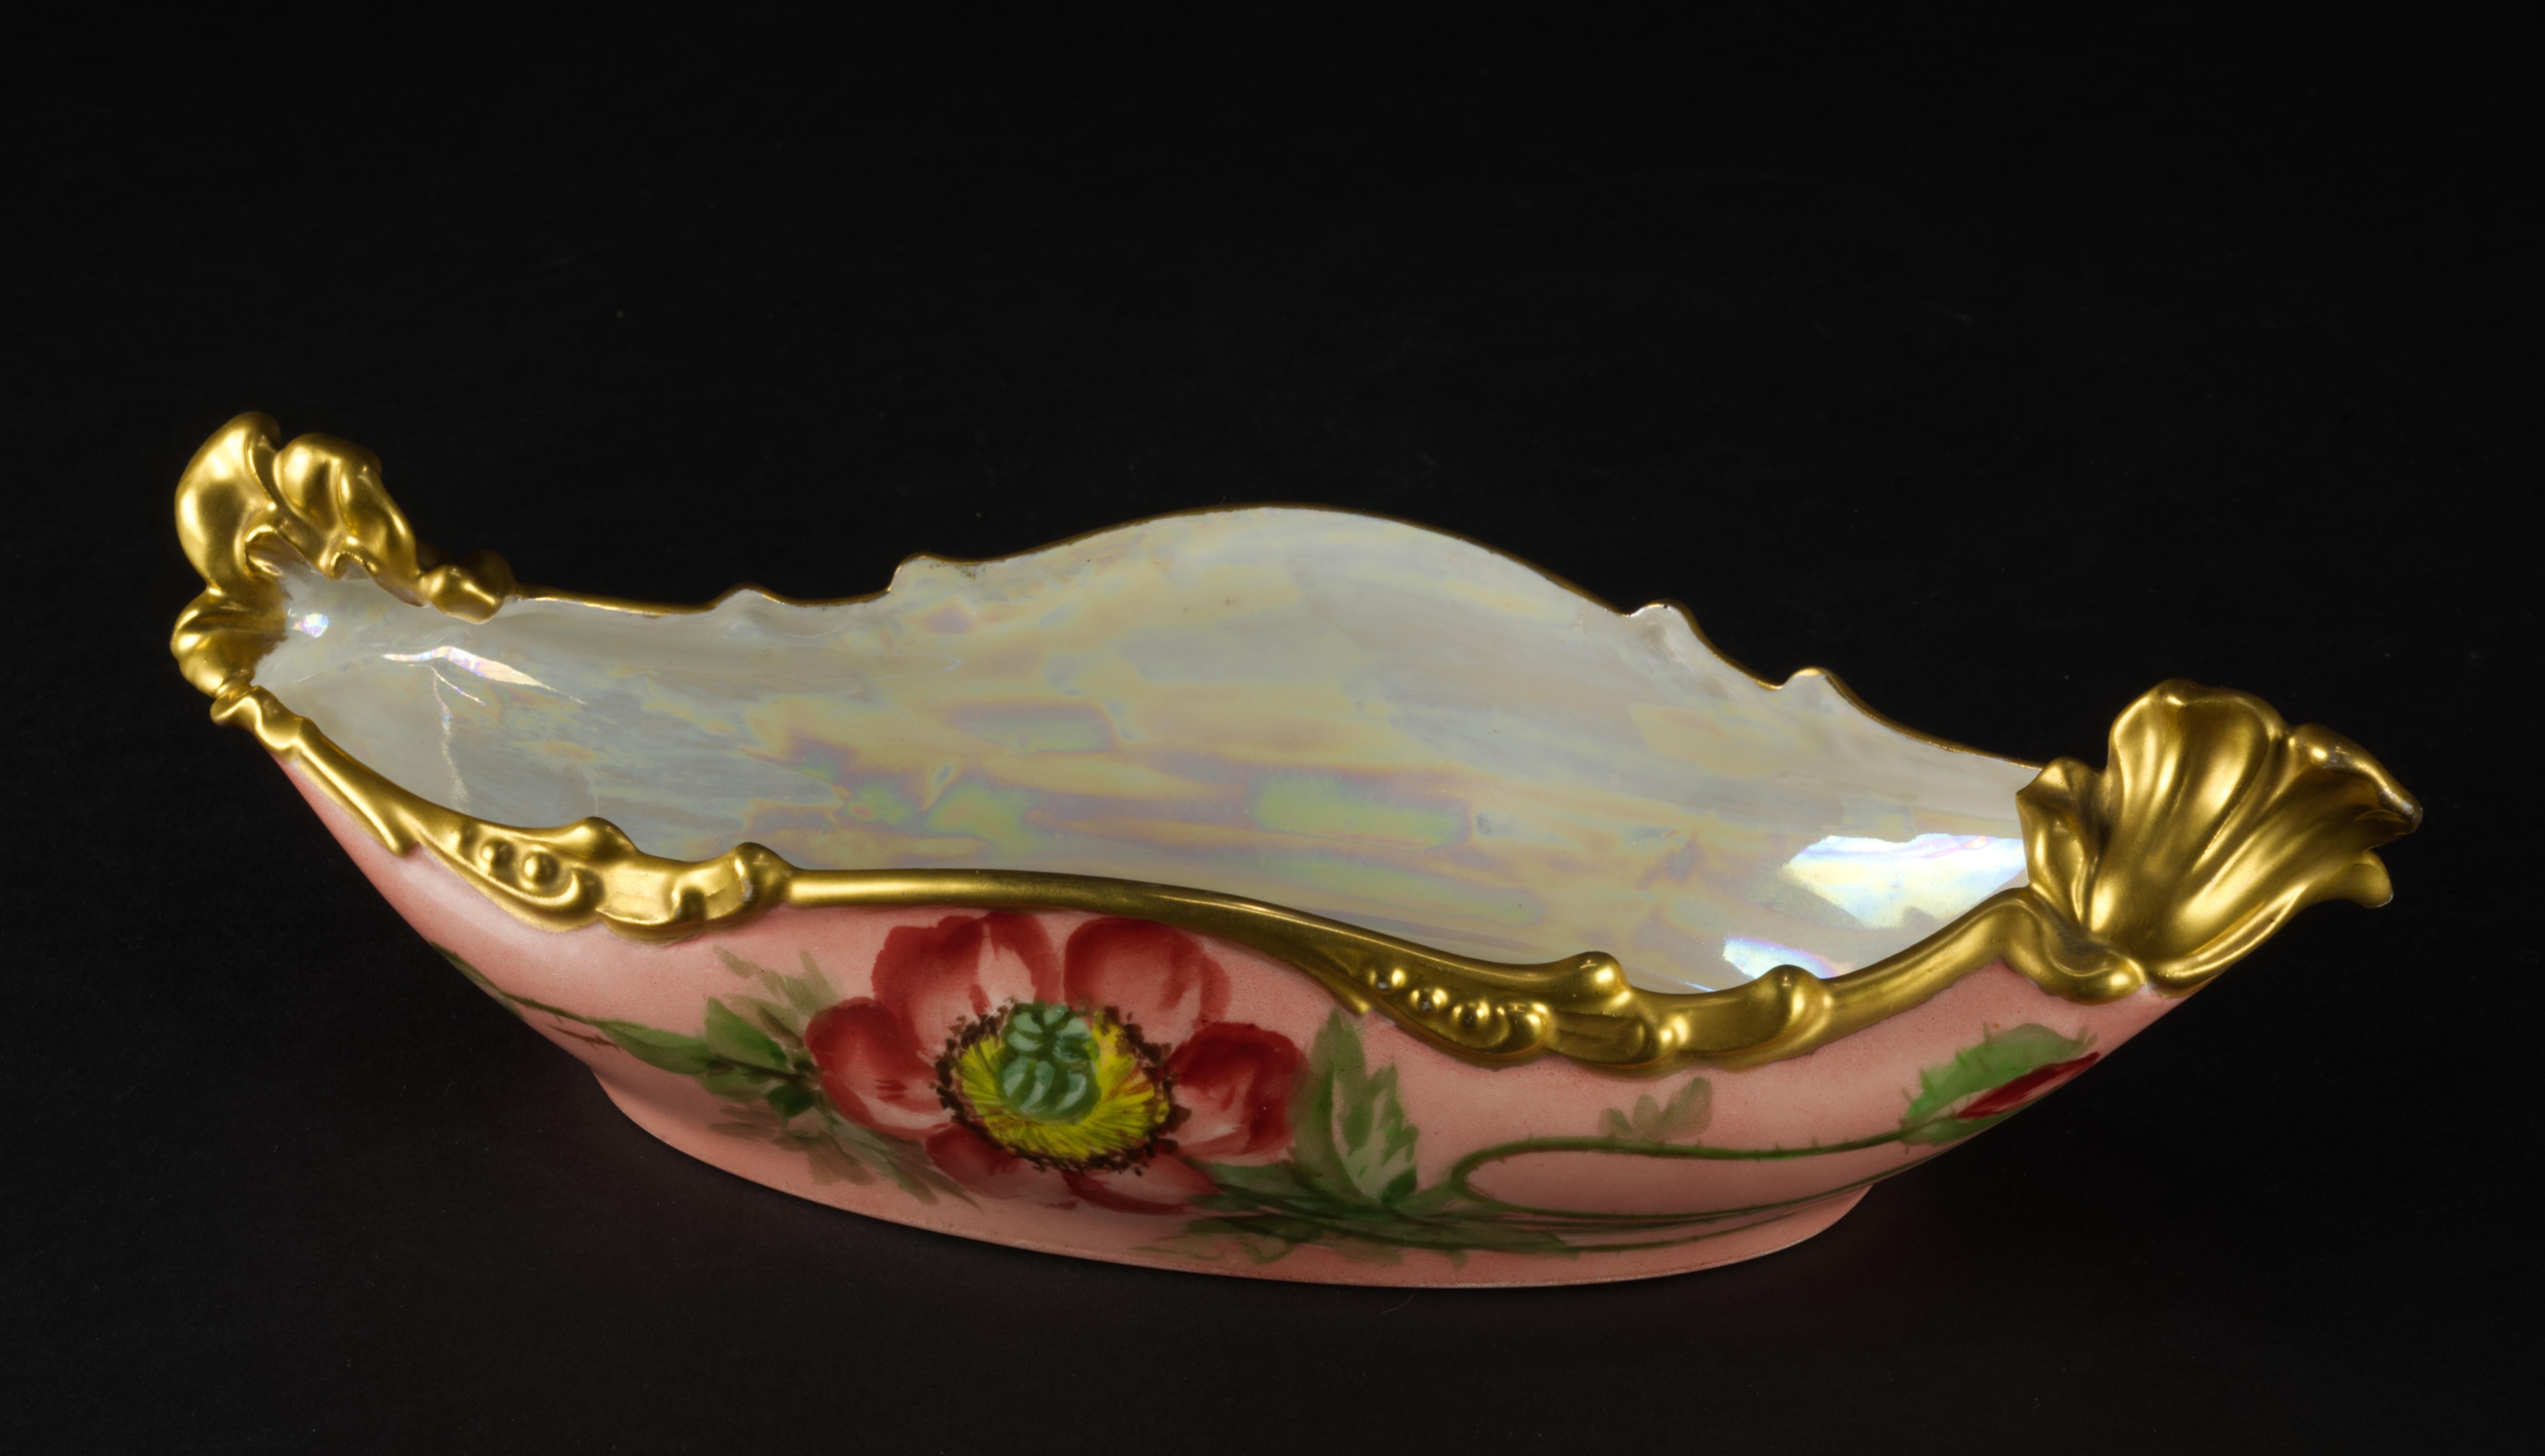 
Rare Jean Pouyat porcelain ravier plate or serving bowl is hand painted with red poppy flowers on pink background and decorated with elaborate Art Nouveau style gilded trim; wavy, organically shaped rim flows around the bowl with two raised areas